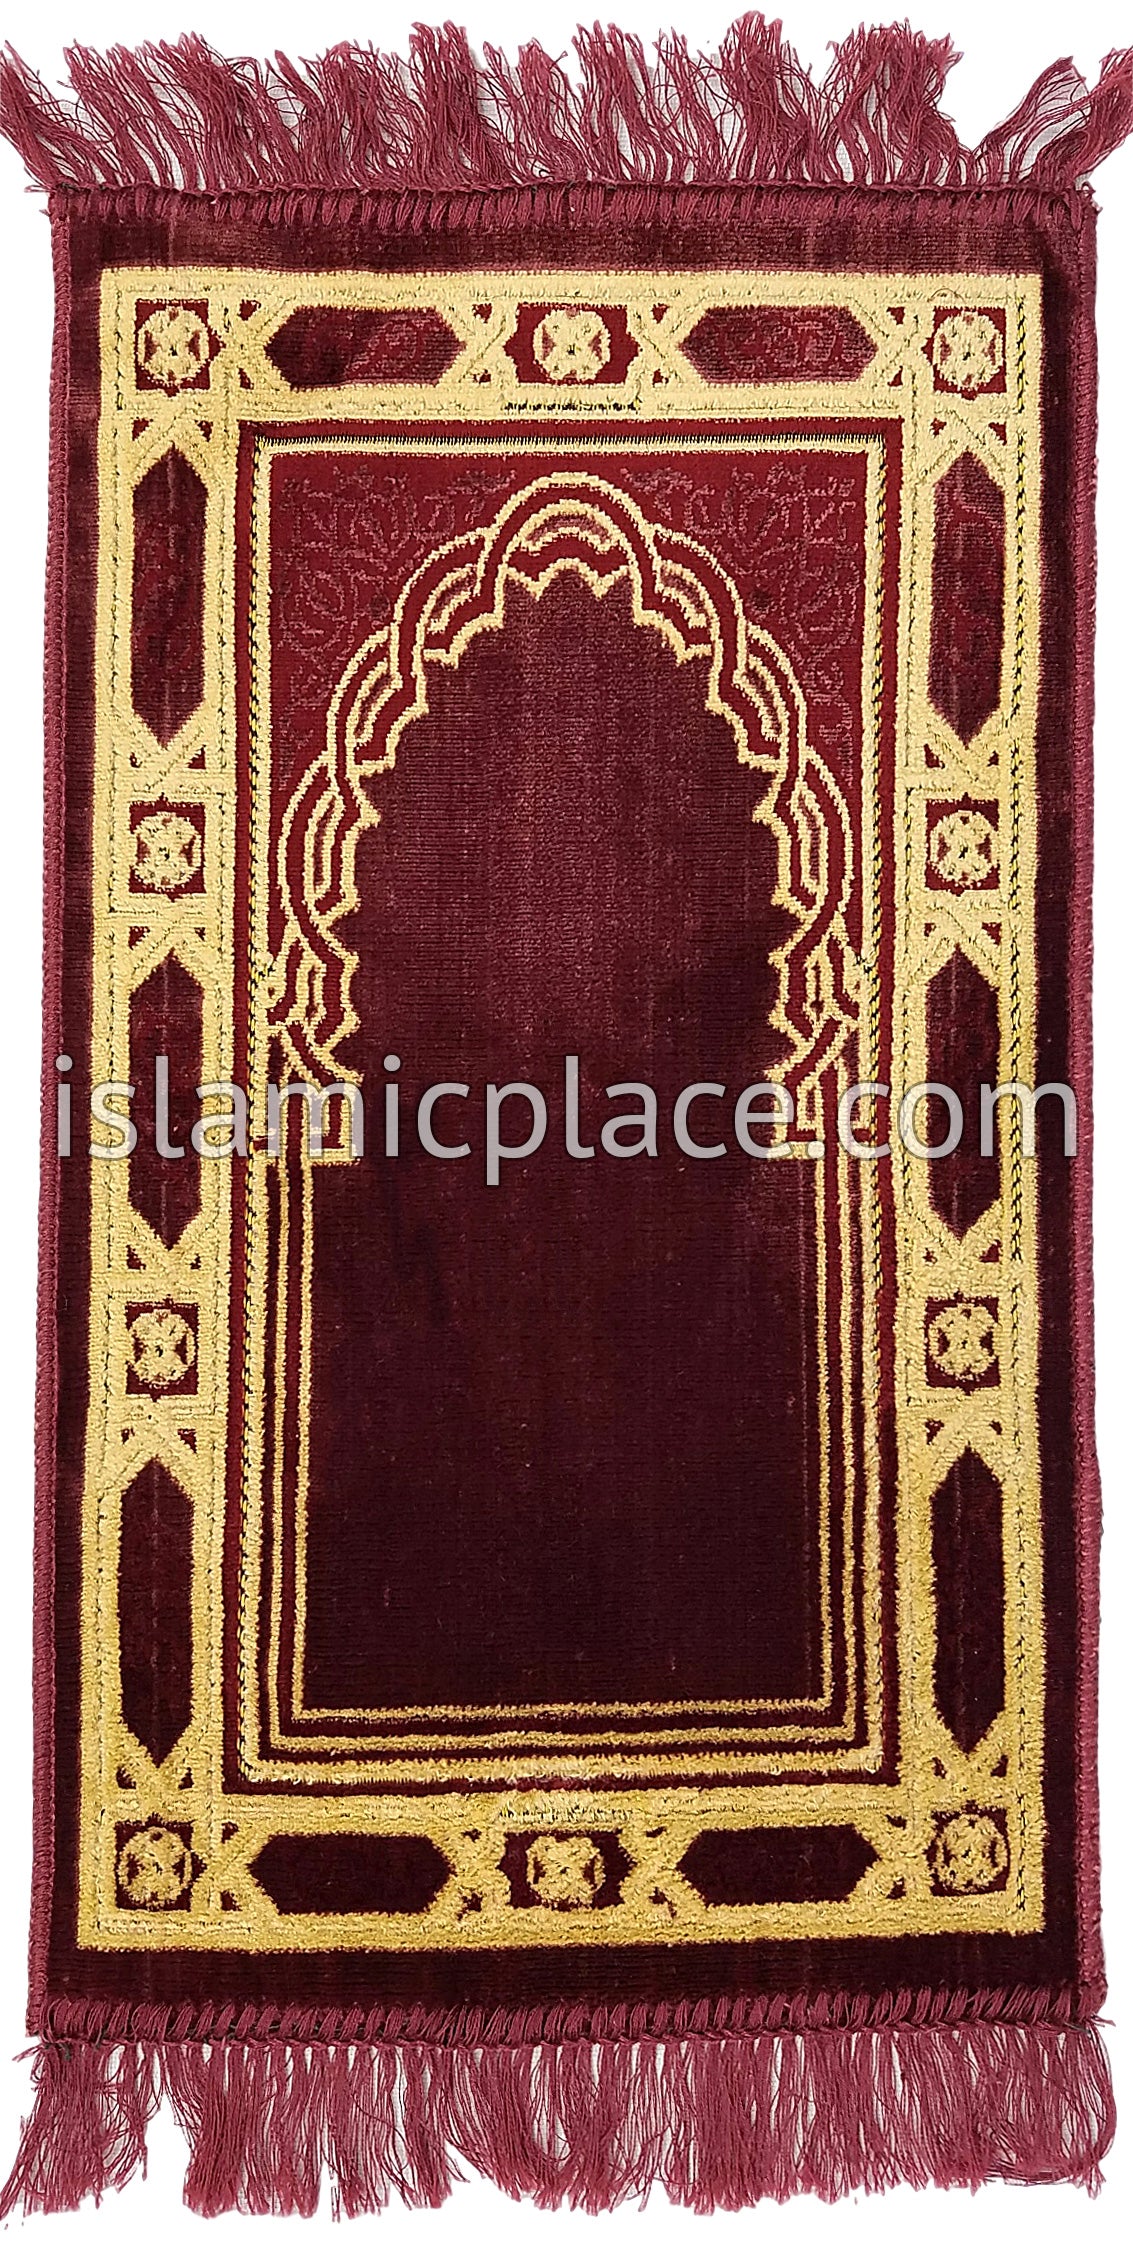 Dusty Rose Prayer Rug with Islamic Mihrab Design (Child Size)